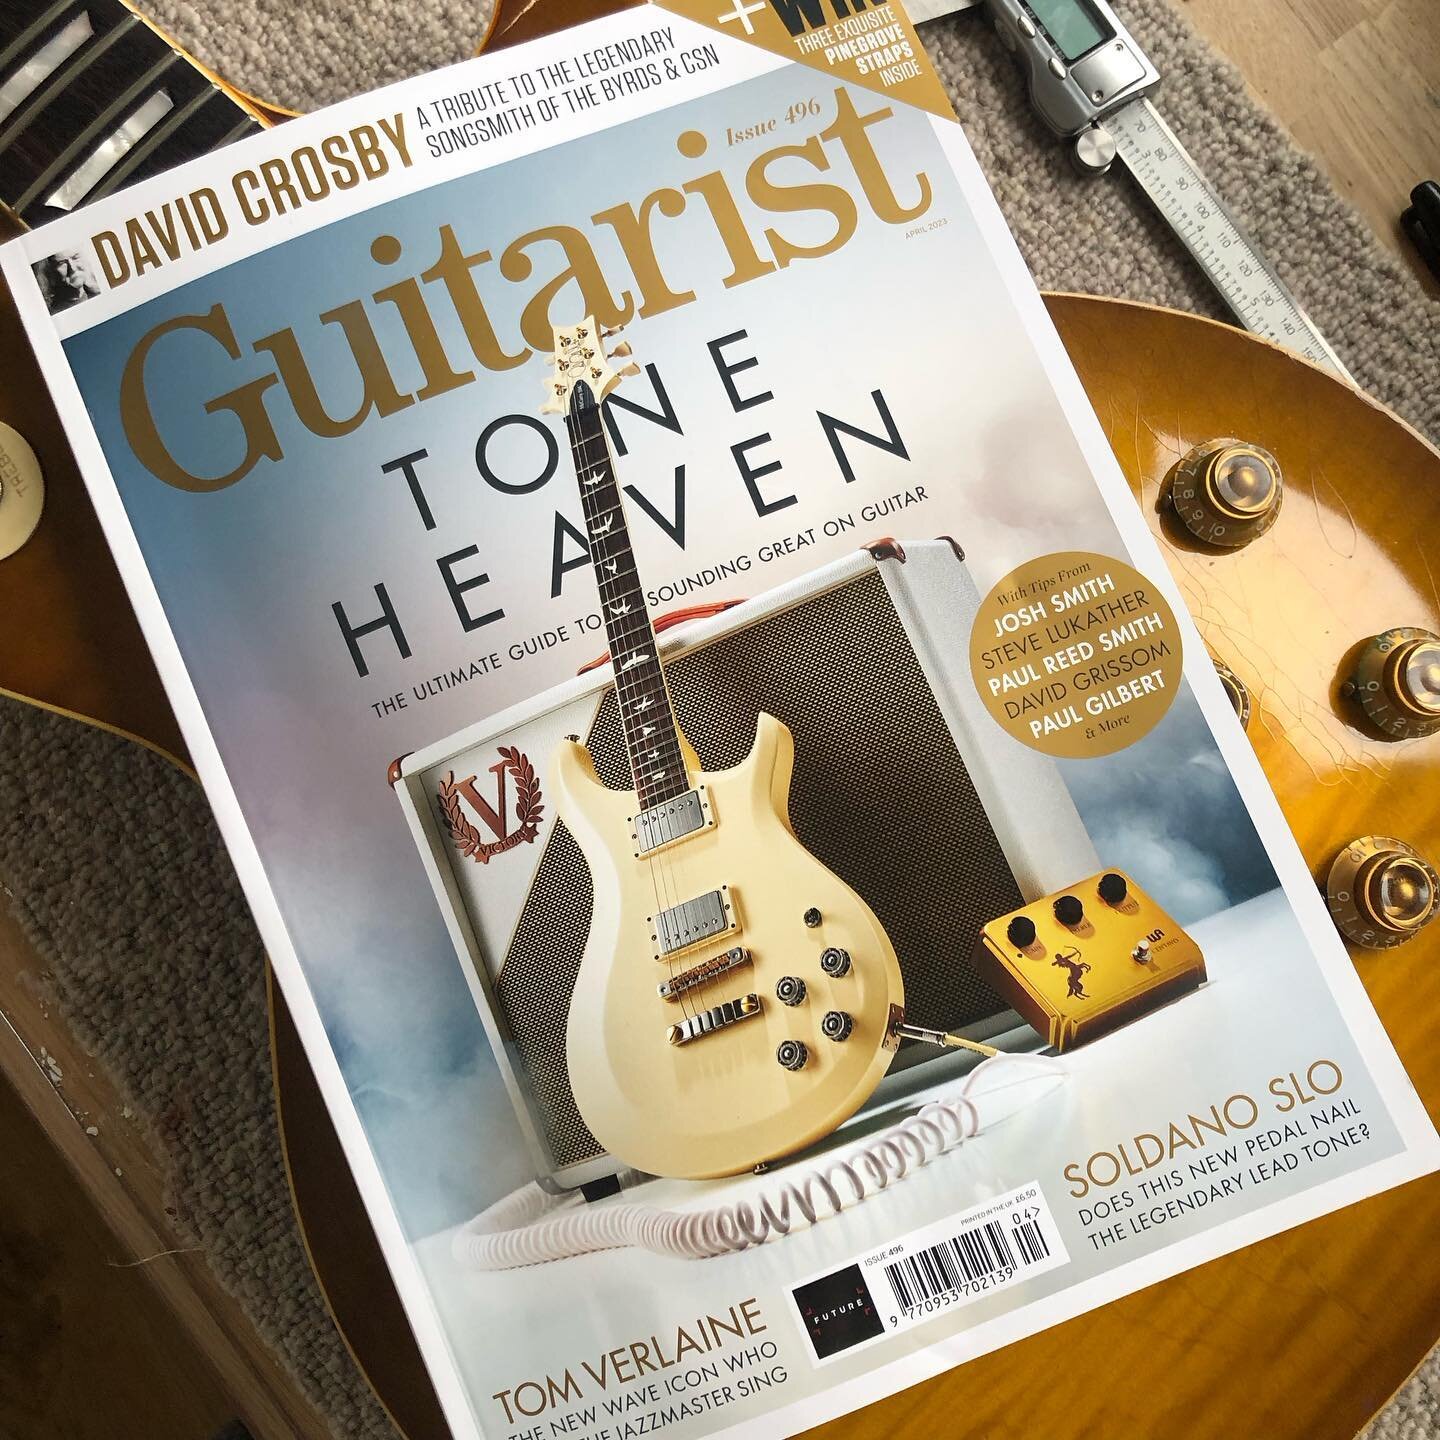 Very chuffed to have my first cover story for @guitarist_mag - 30 Tone tips to get the best out or your electrics, acoustics and amps. Issue 496 available now. #guitartone #acousticguitar #guitarupgrade #guitaramp #guitaramps